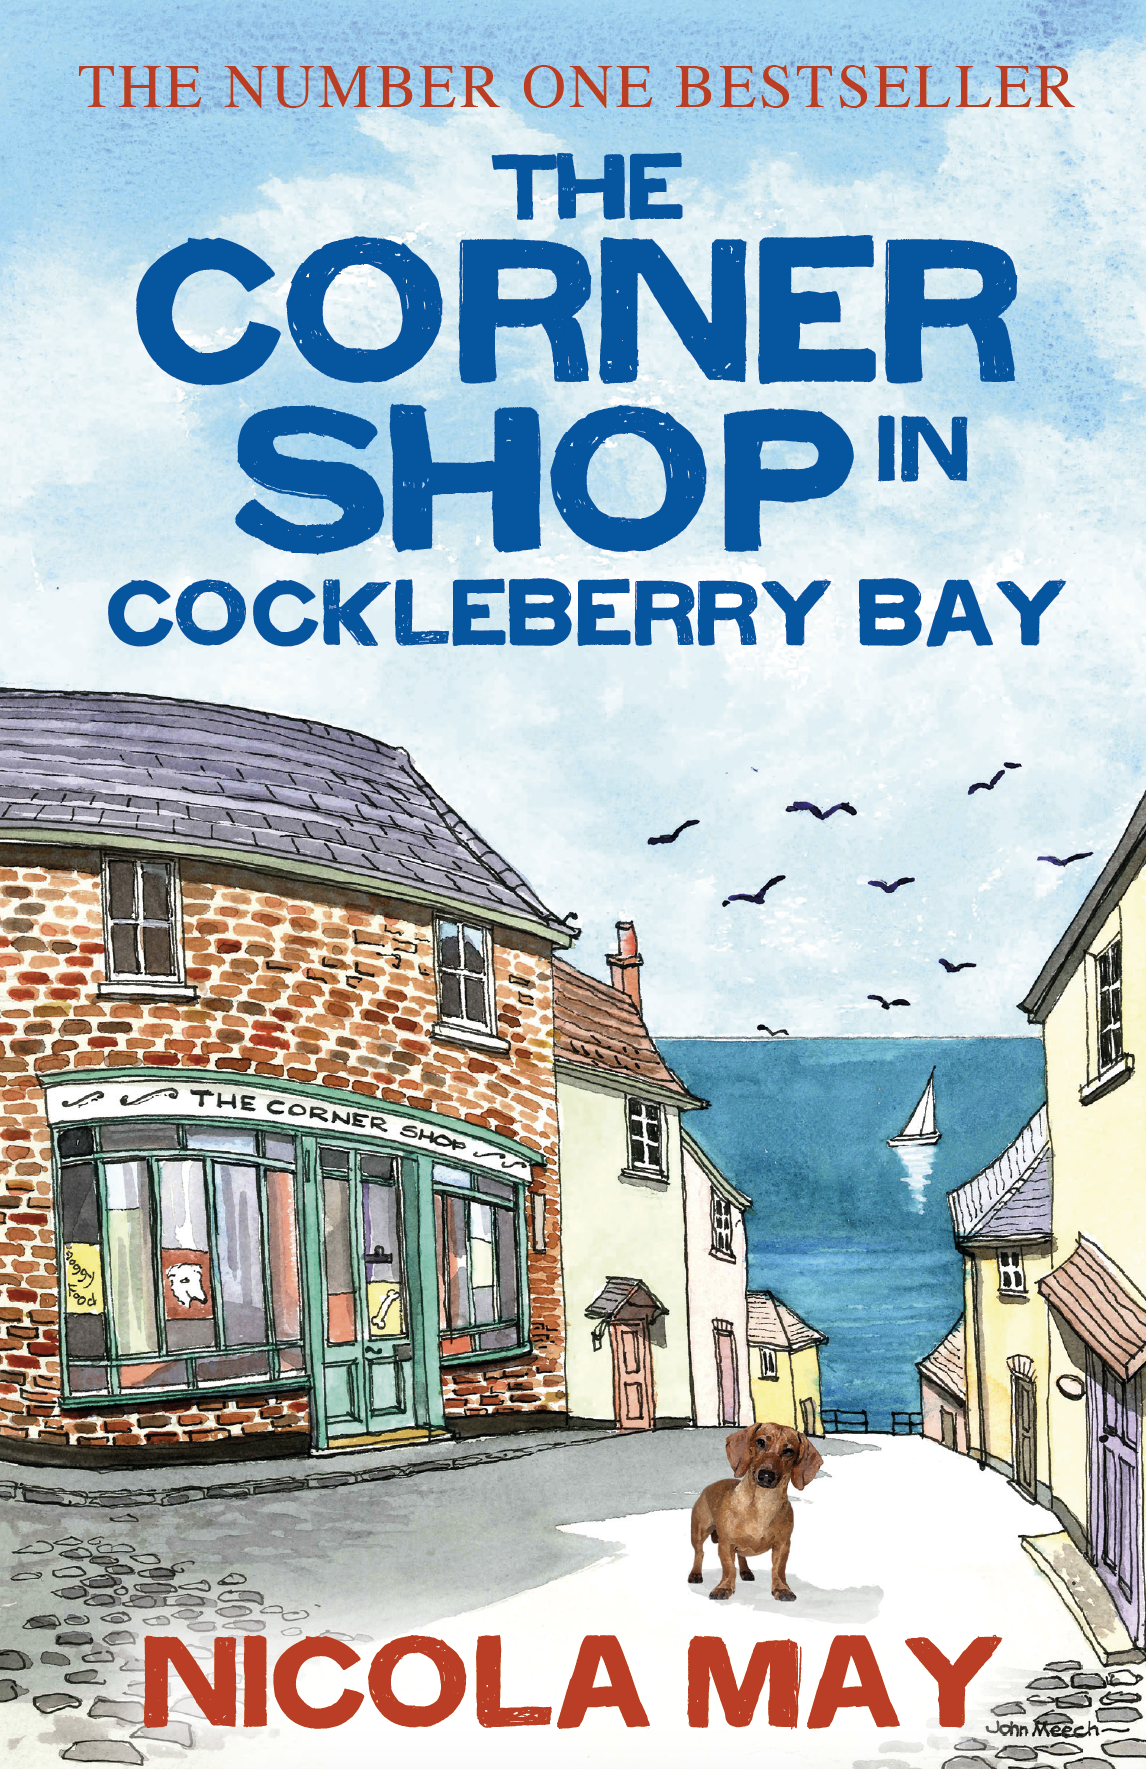 The corner shop in Cockleberry Bay